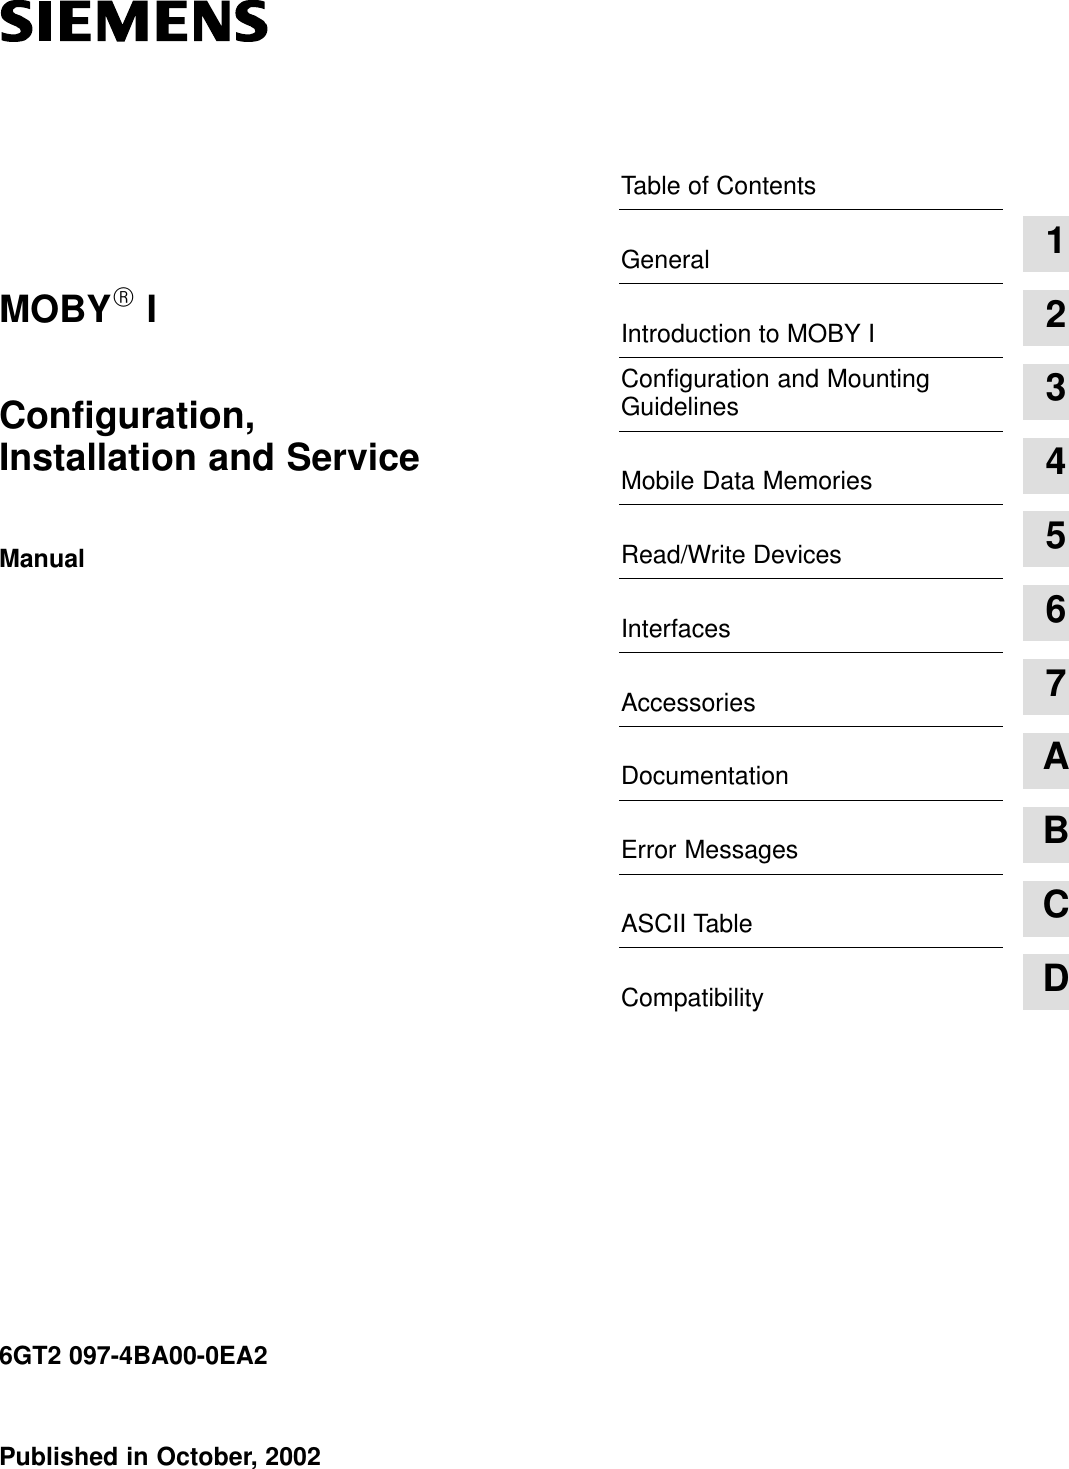 Table of ContentsGeneral 1Introduction to MOBY I 2Configuration and MountingGuidelines 3Mobile Data Memories 4Read/Write Devices 5Interfaces 6Accessories 7Documentation AError Messages BASCII Table CCompatibility DPublished in October, 20026GT2 097-4BA00-0EA2 Configuration, Installation and ServiceManualMOBYR I